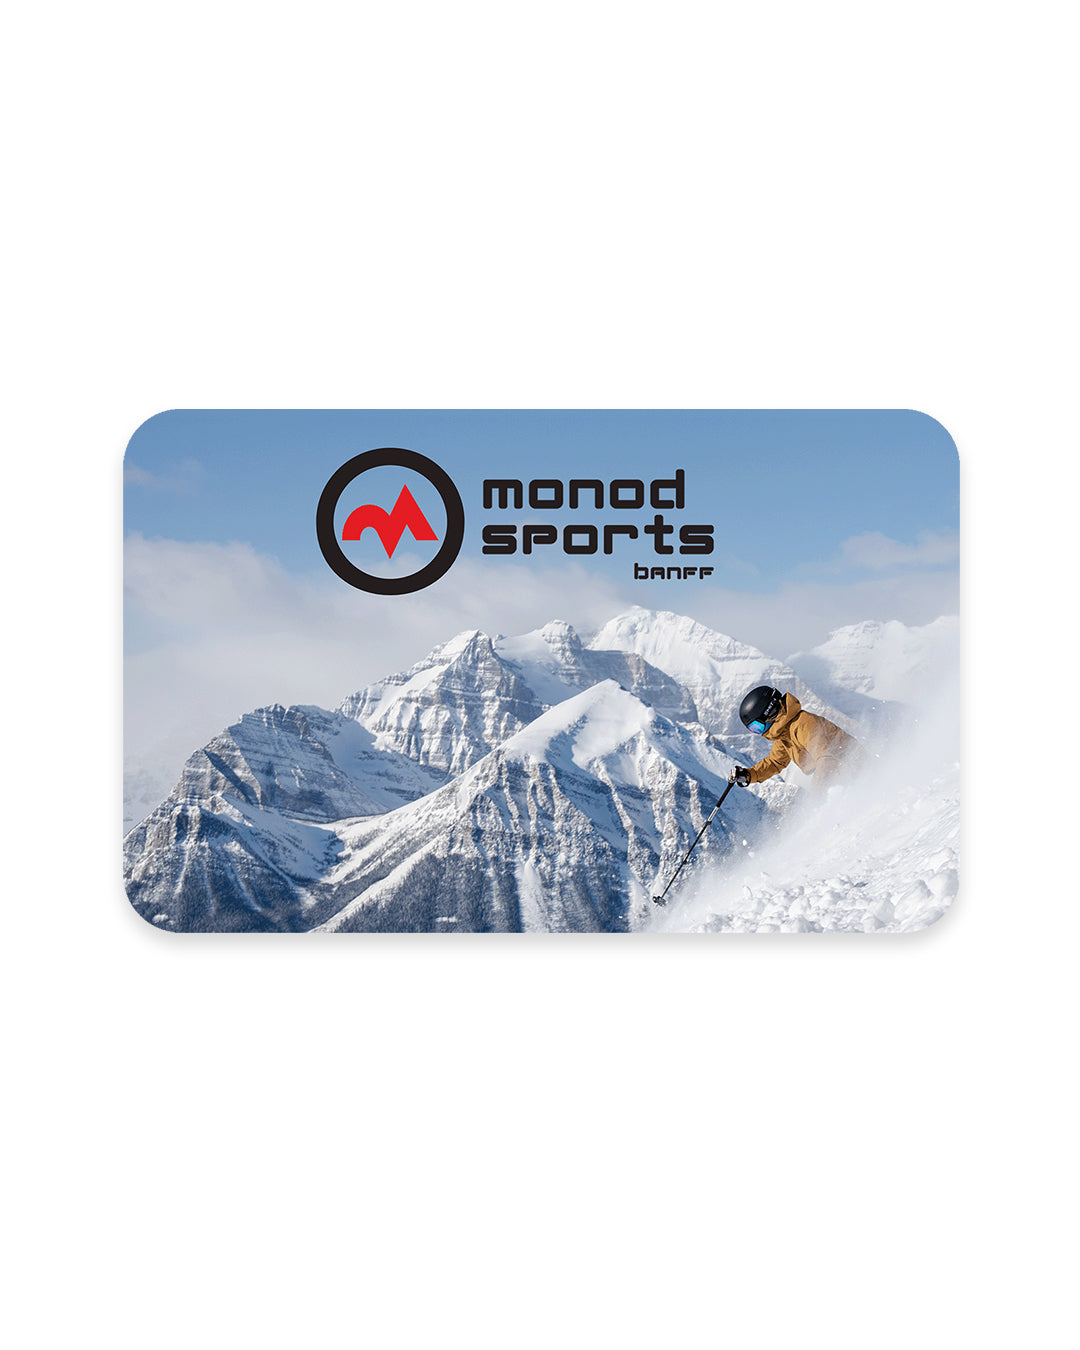 Monod Sports Gift Cards